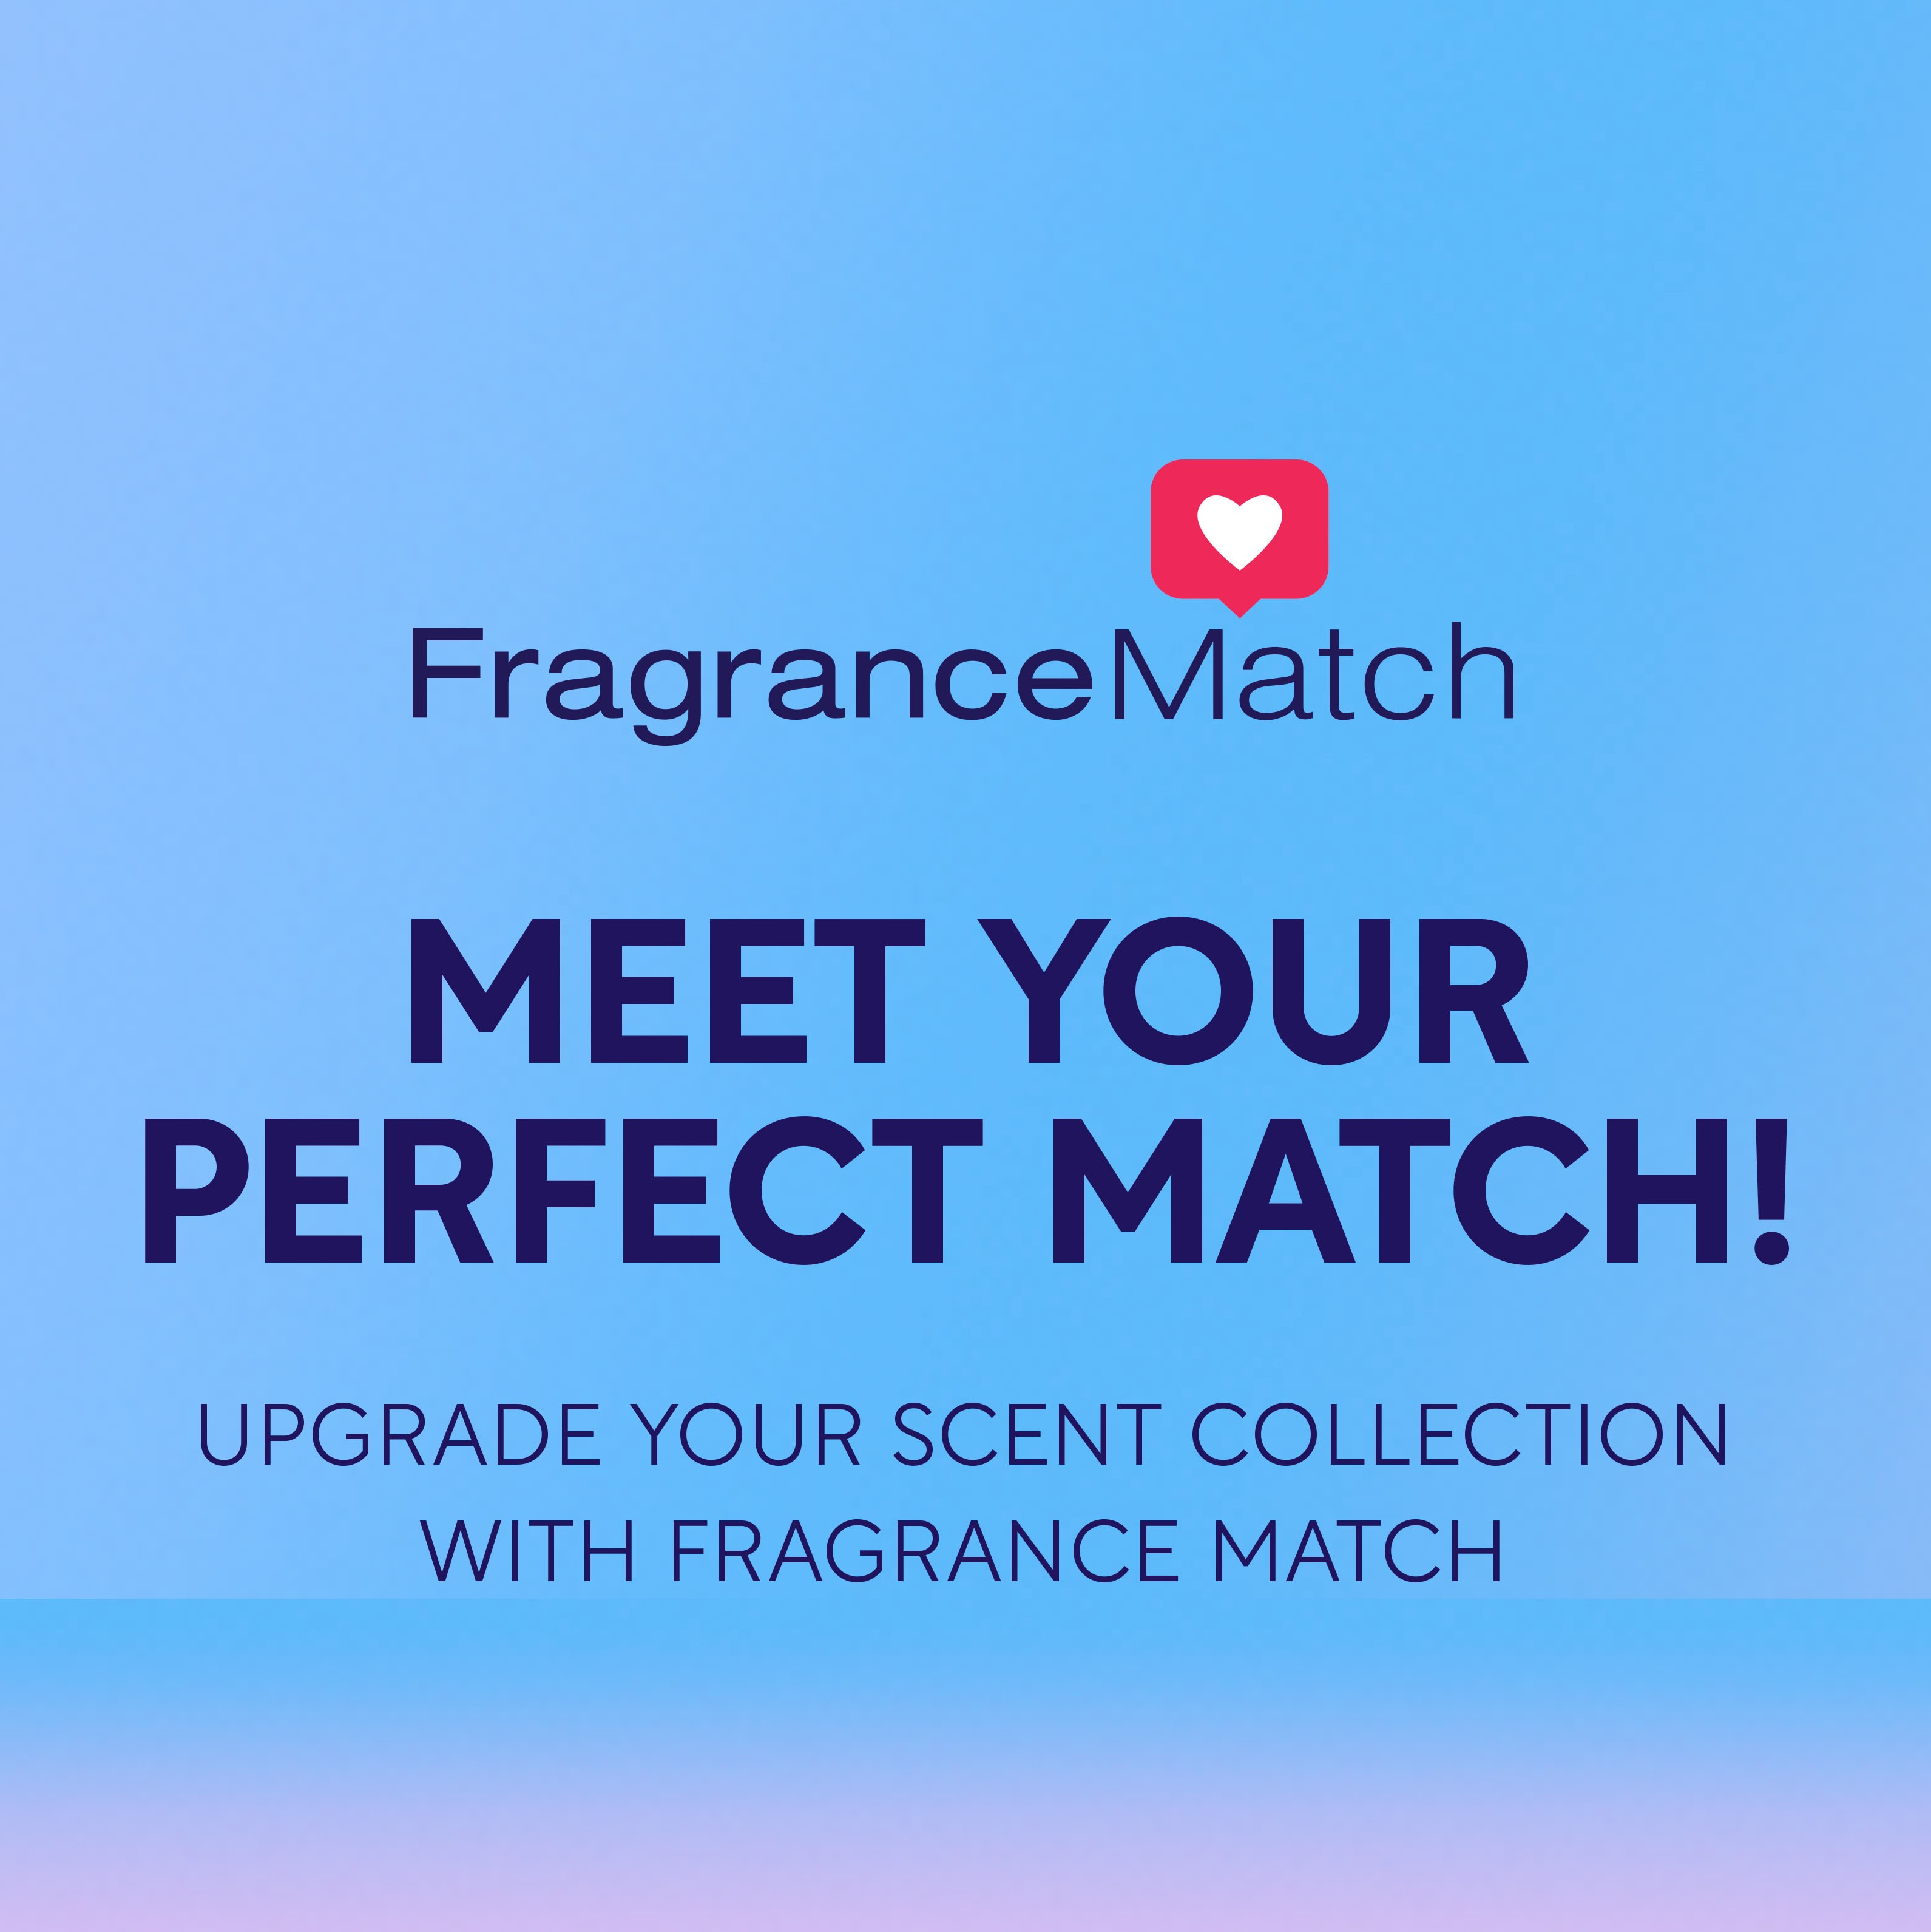 Fragrance Match was launched